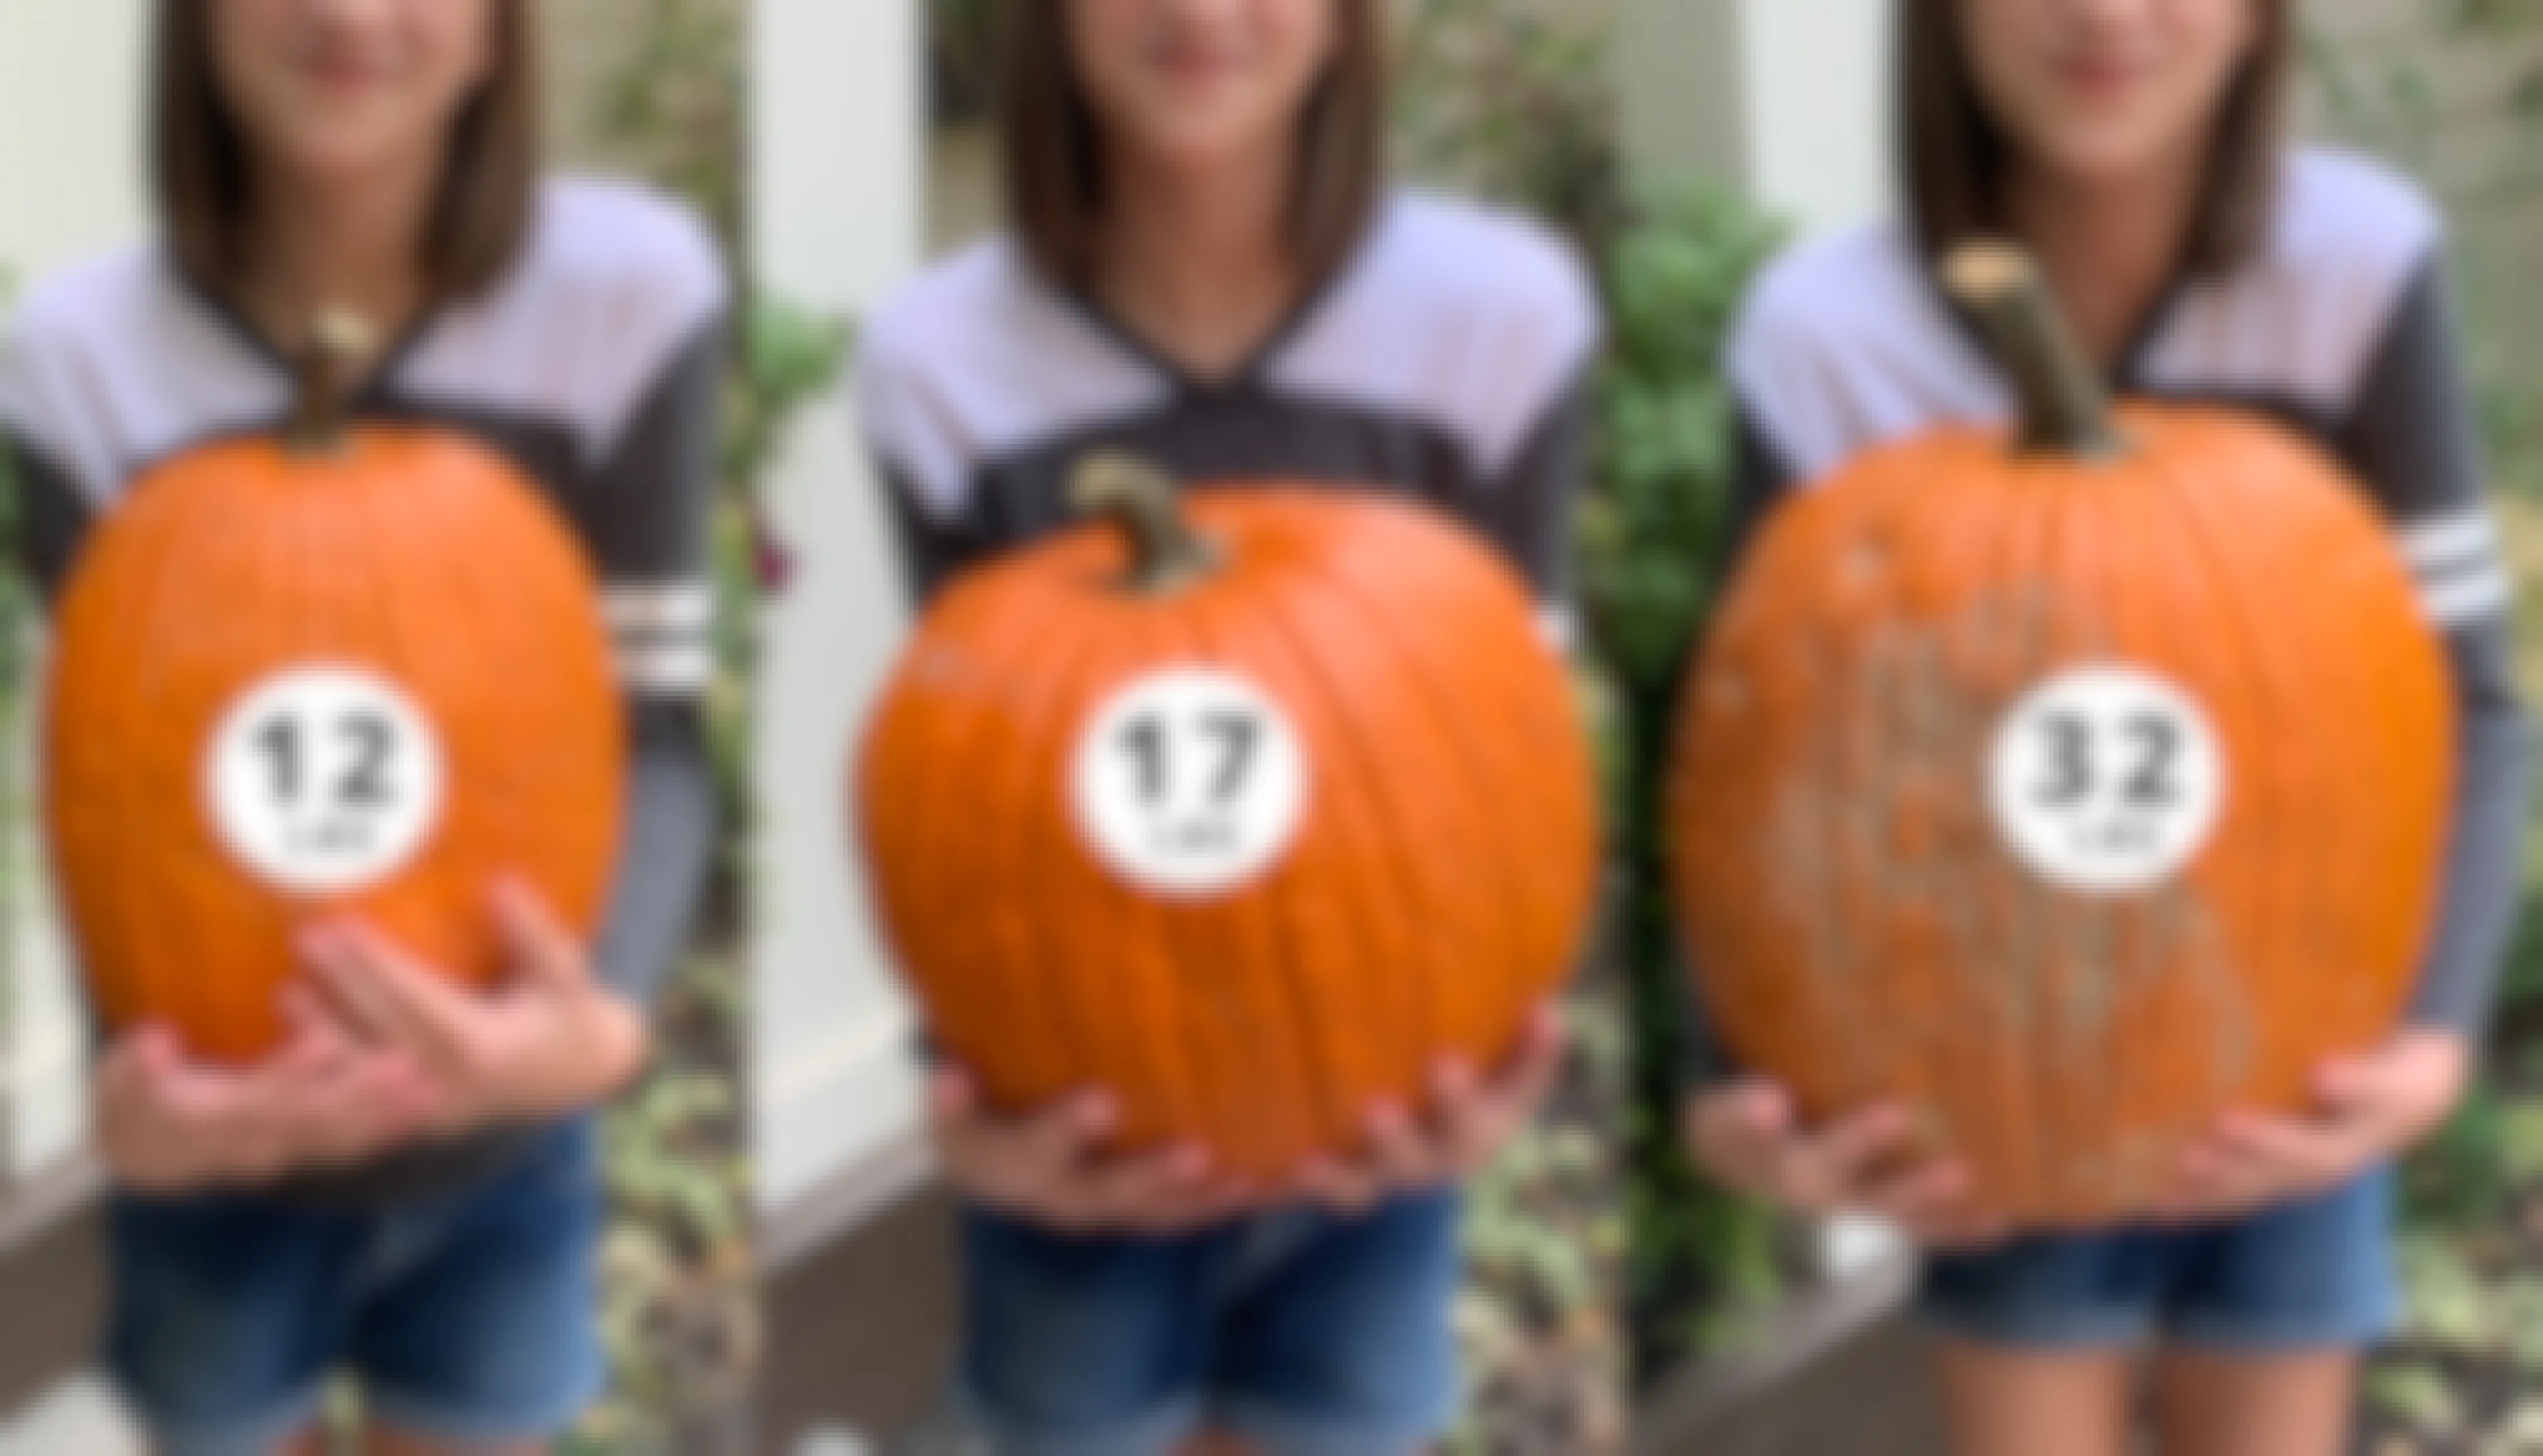 Three side-by-side images of a young girl holding pumpkins that get progressively larger, the first one 12lbs, the second 17lbs, and the third 32lbs.